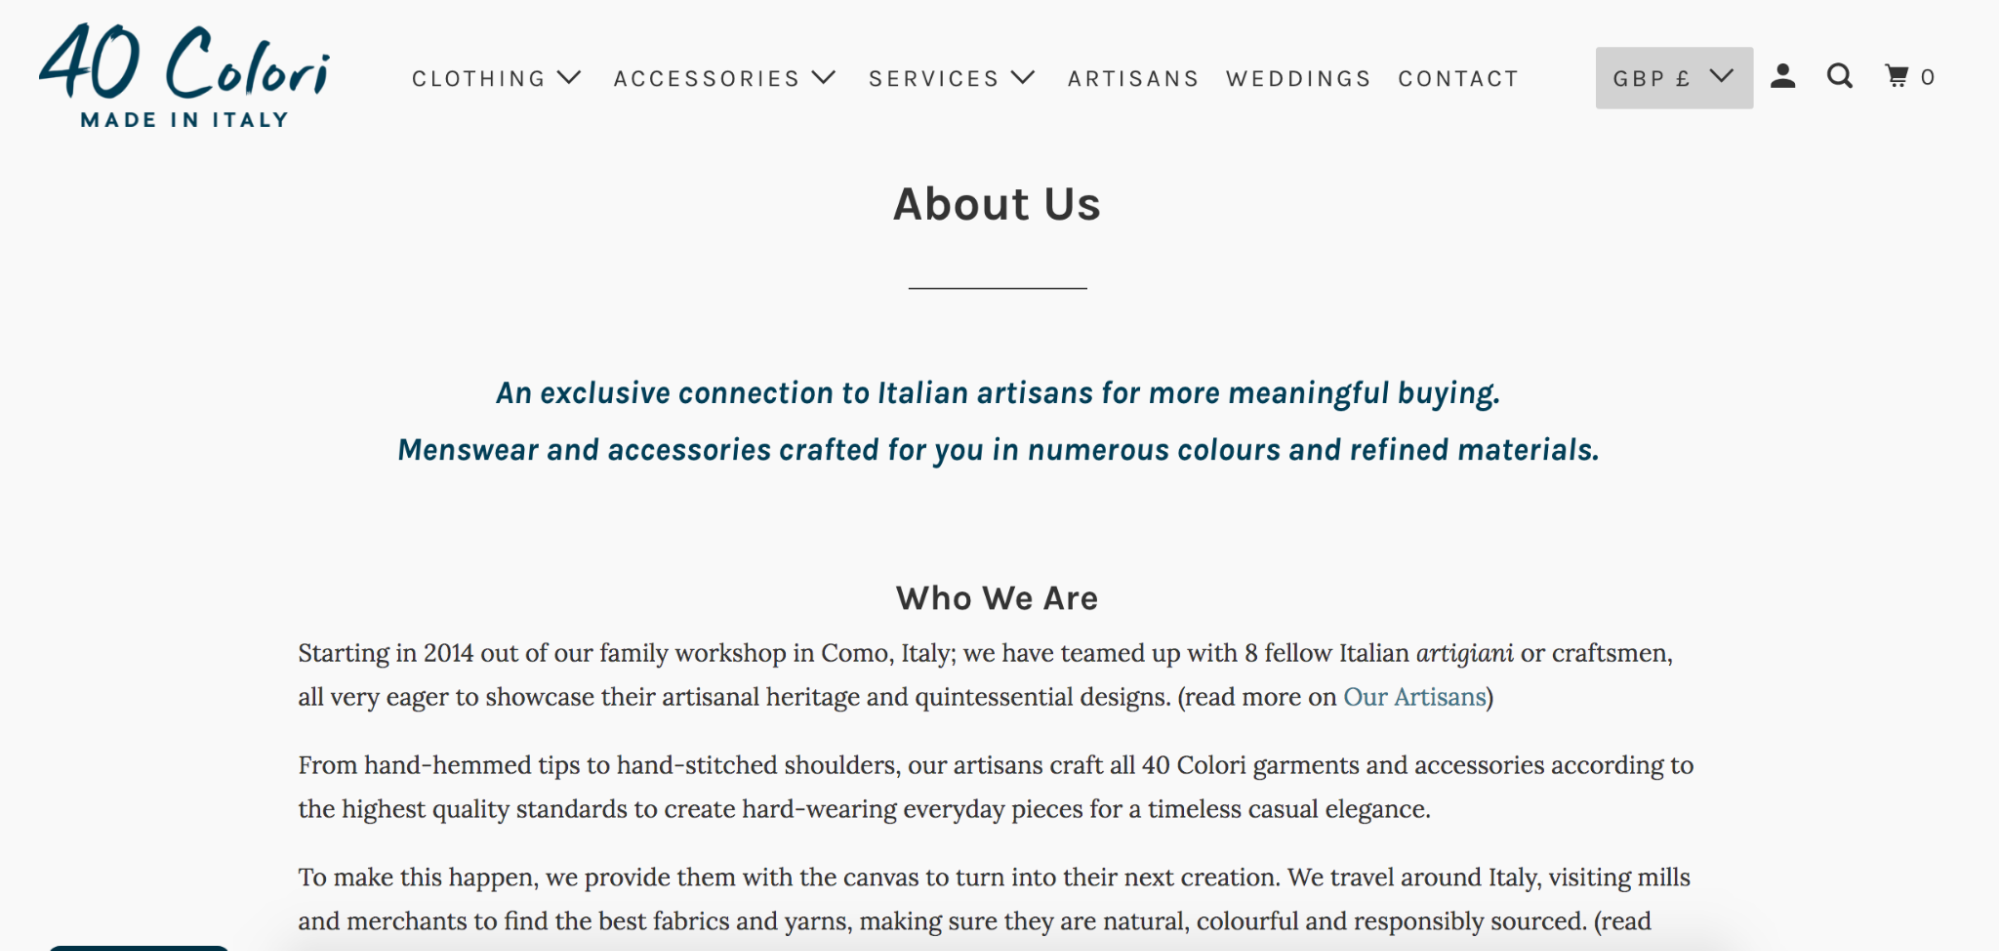 Screenshot of 40 Colori About Us page showing clean black text on a white background